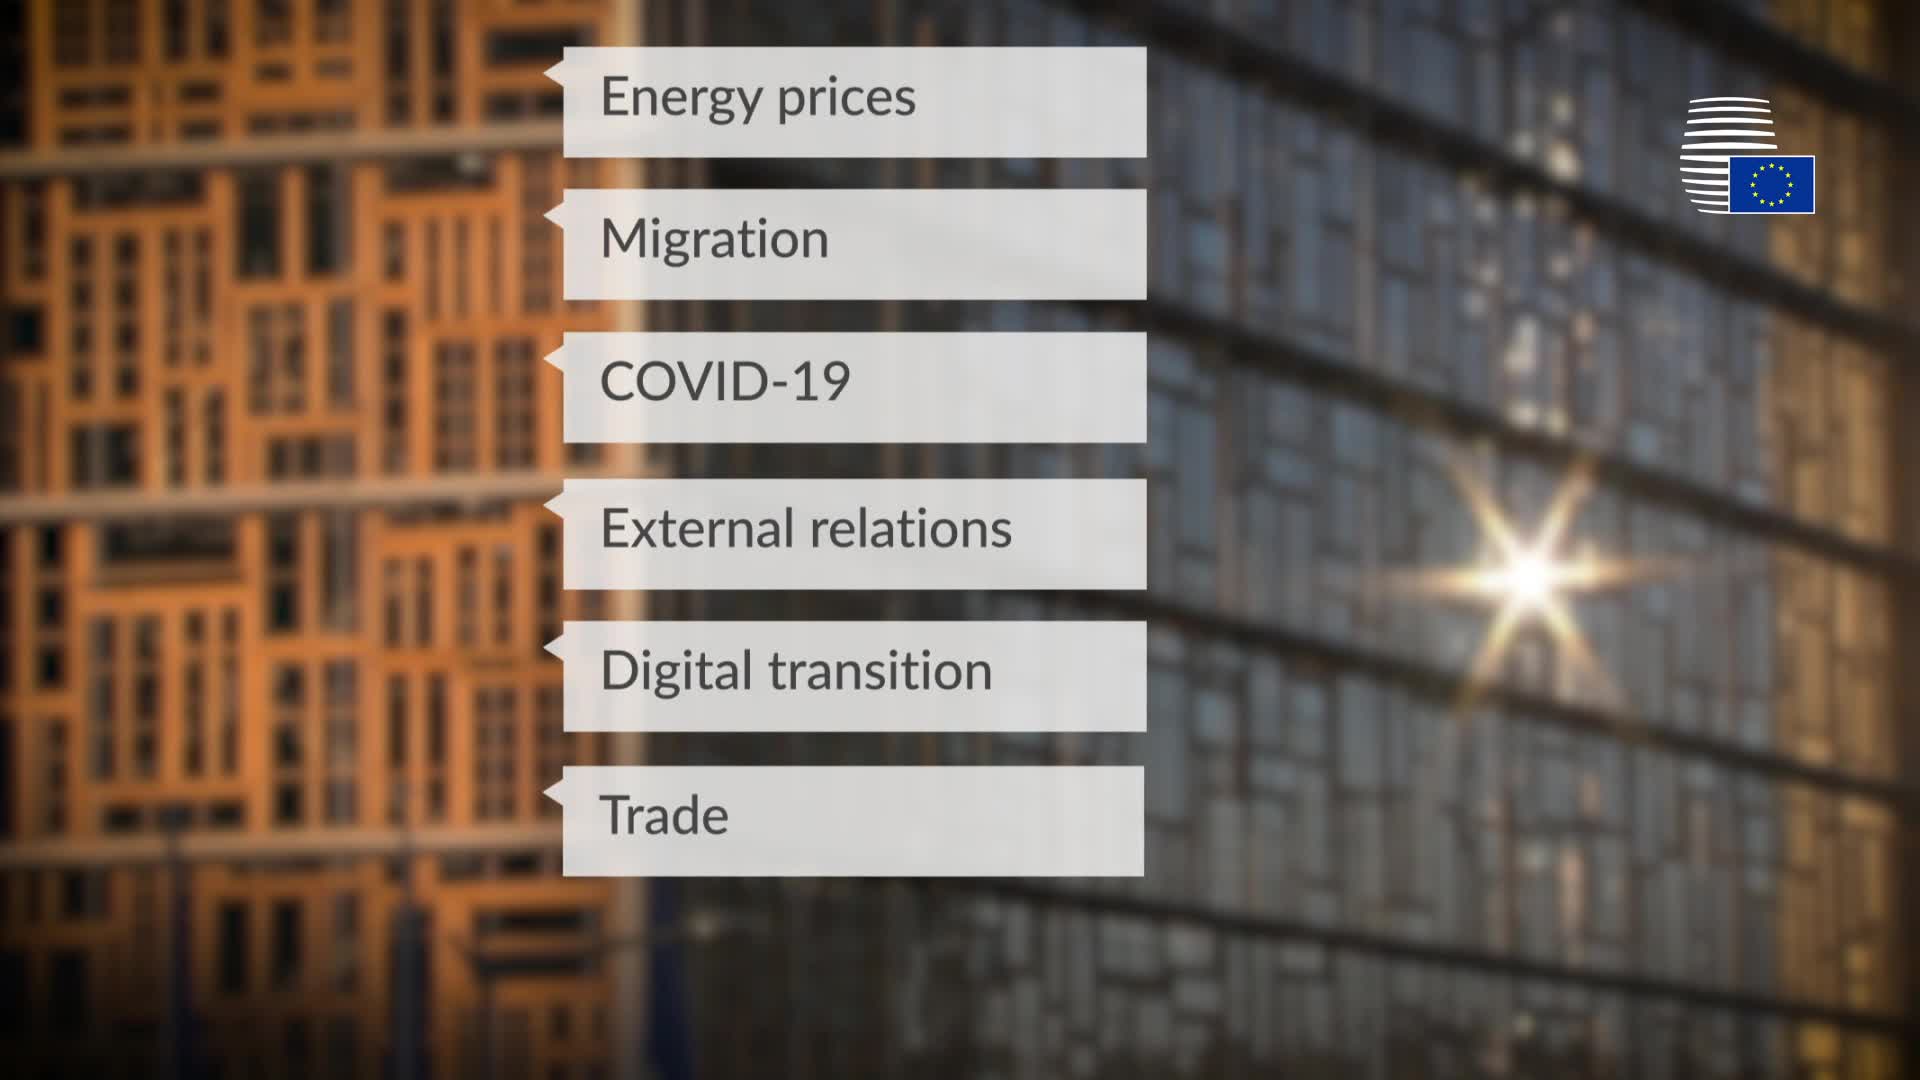 Video: EU leaders meeting in Brussels on 21-22 October 2021 will discuss energy prices, migration, Covid-19, but also external relations, digital transition and trade.